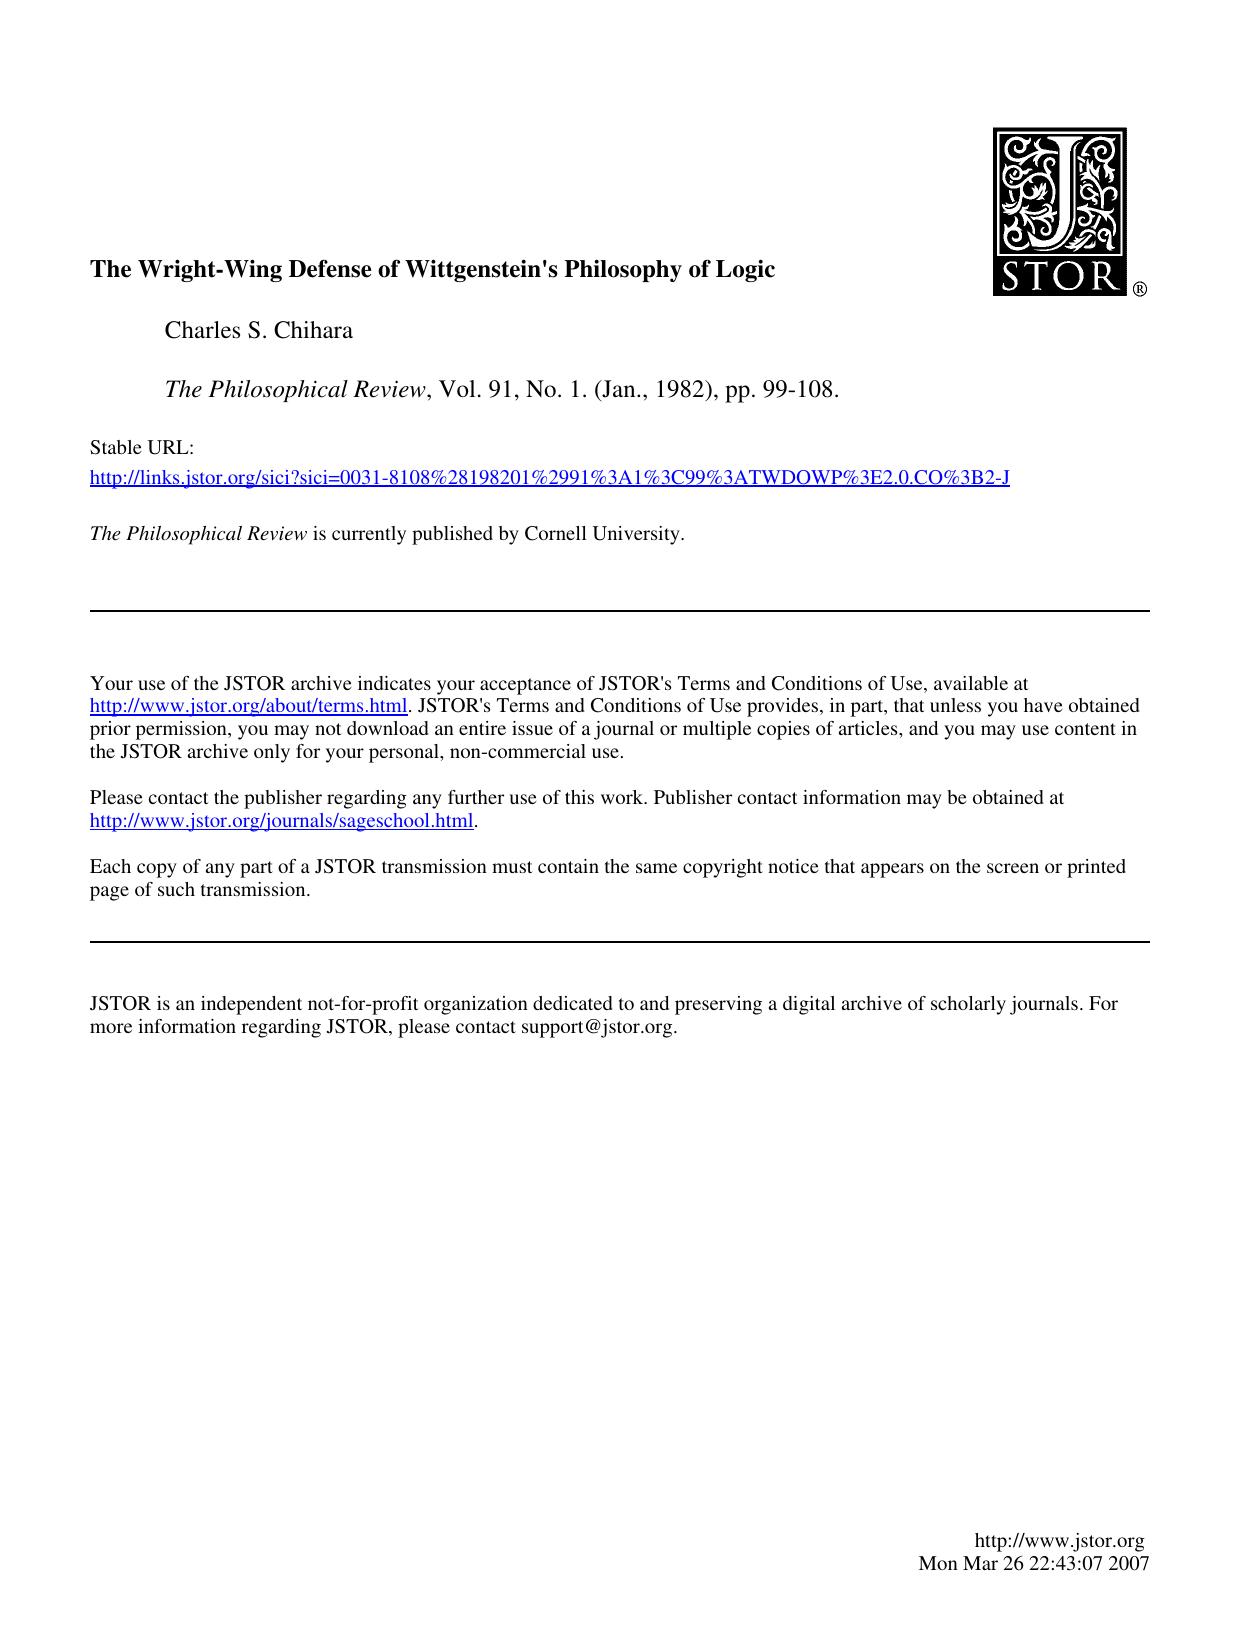 The Wright-Wing Defense of Wittgenstein's Philosophy of Logic - Paper